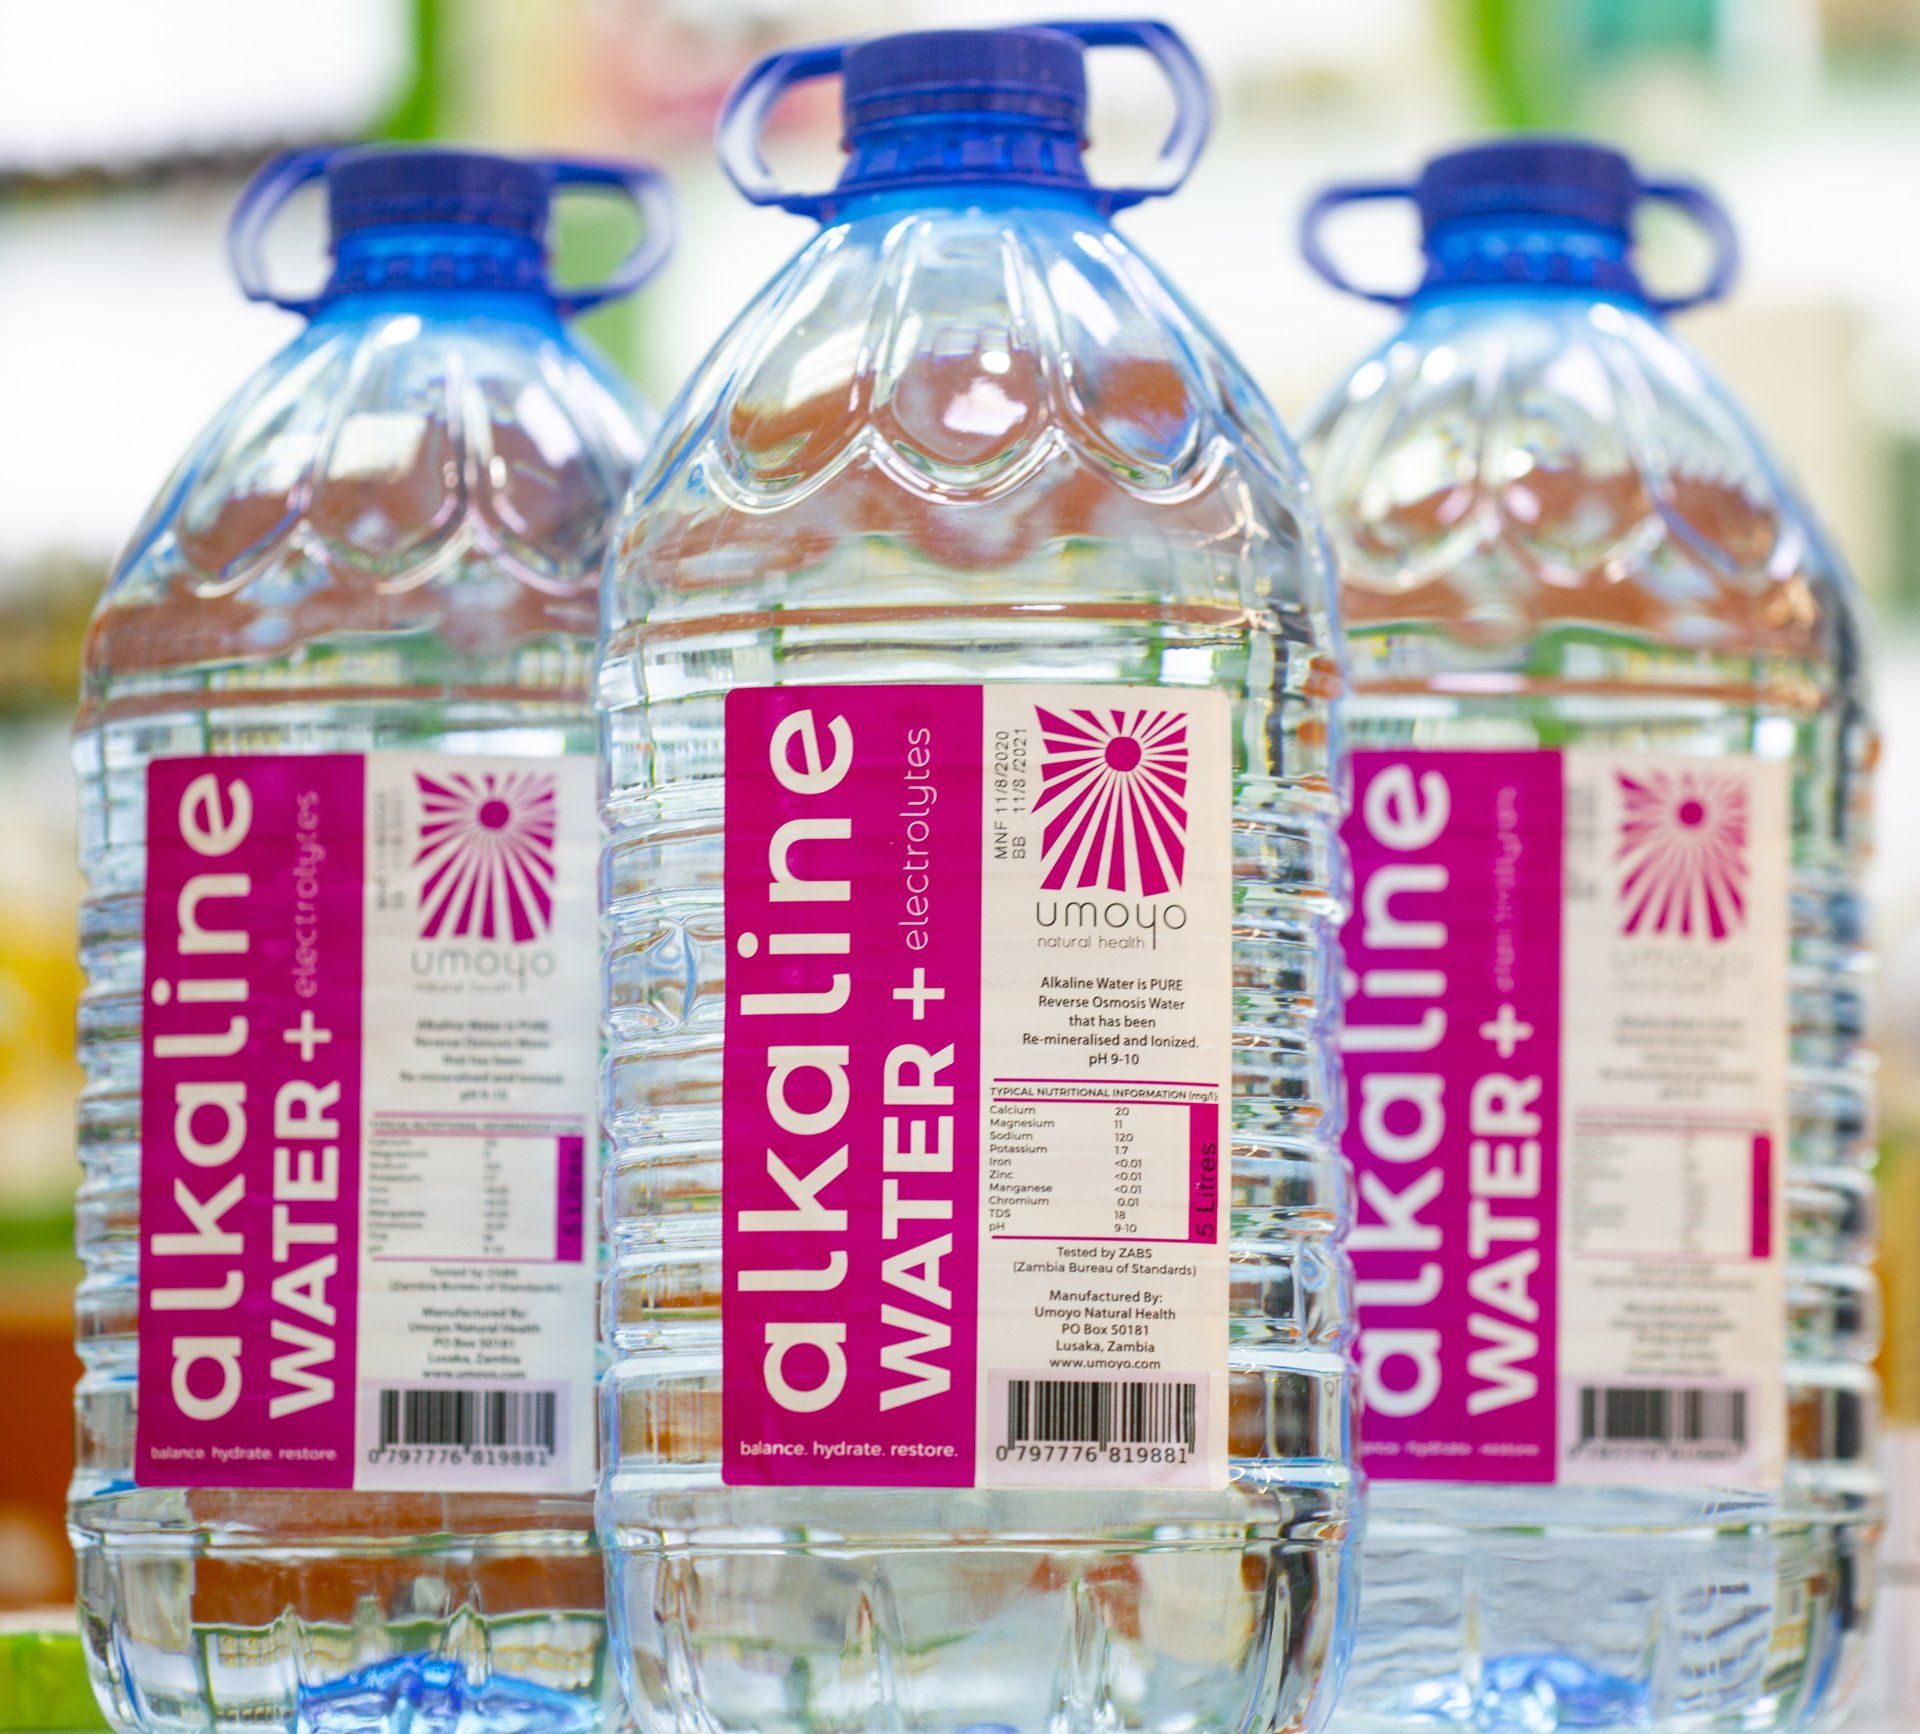 Three bottles of alkaline water are lined up on a table.